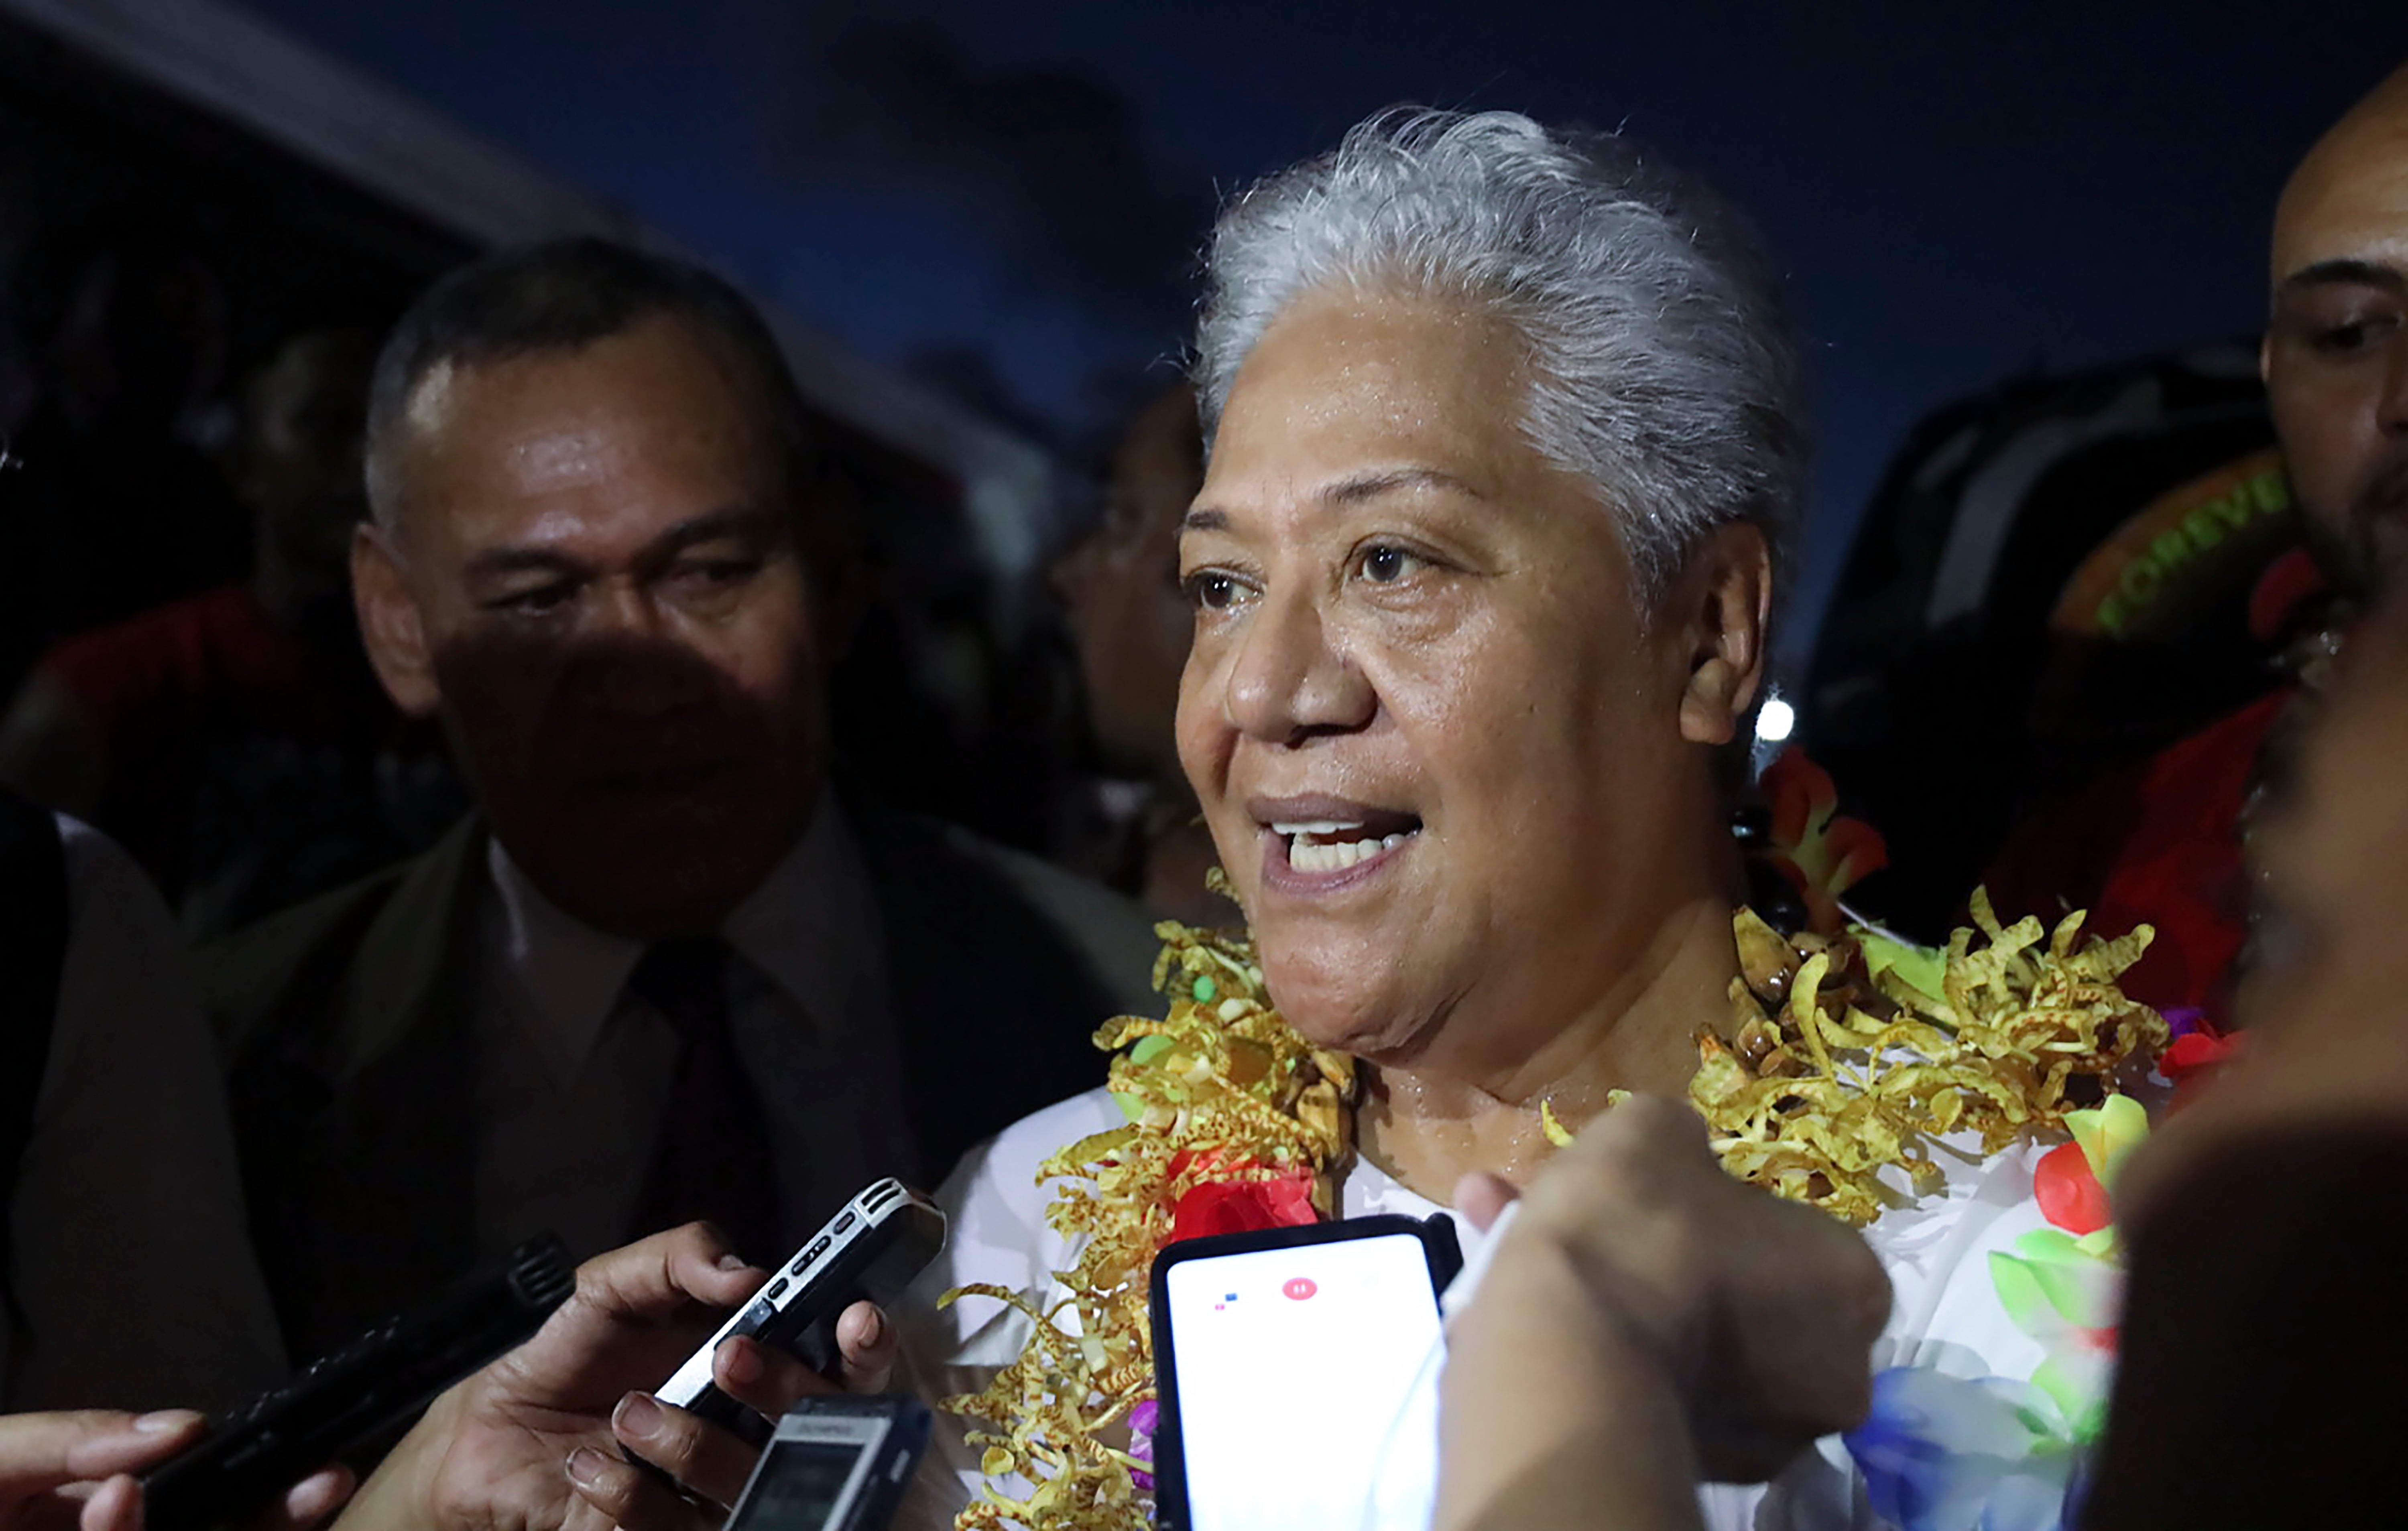 Samoa’s first female prime minister-elect was literally locked out of parliament